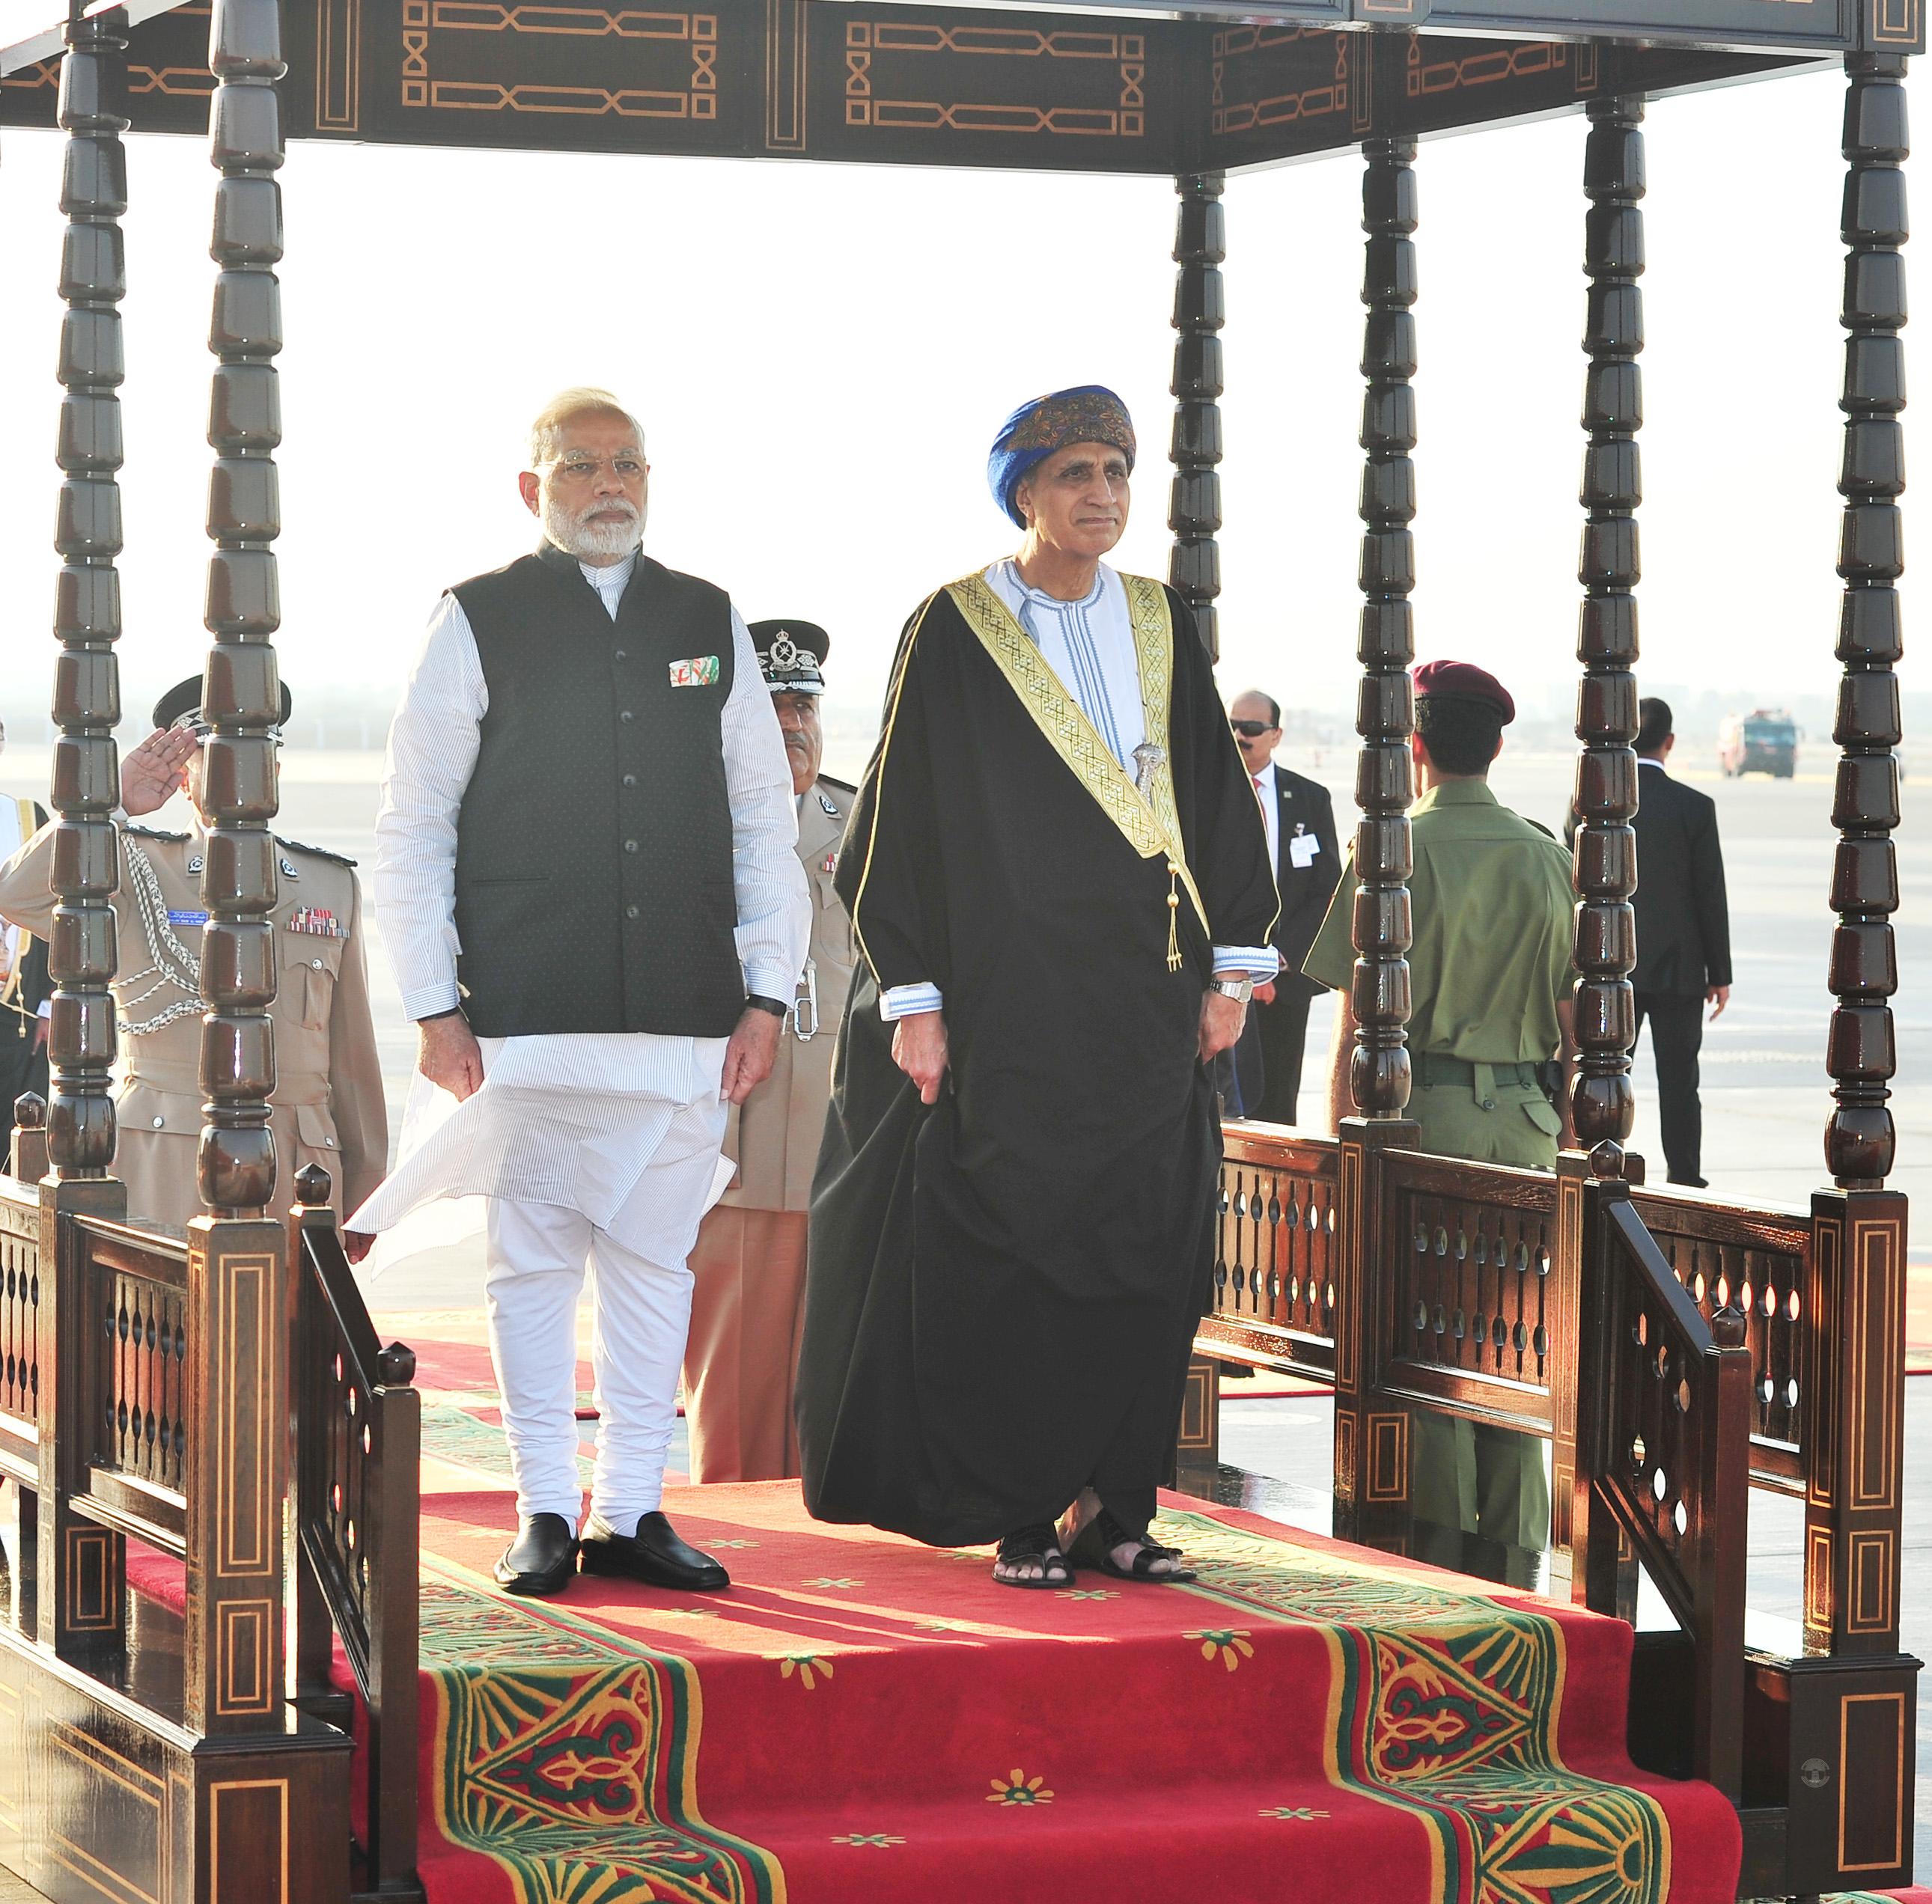 In pictures: Indian Prime Minister arrives in Oman on two-day visit